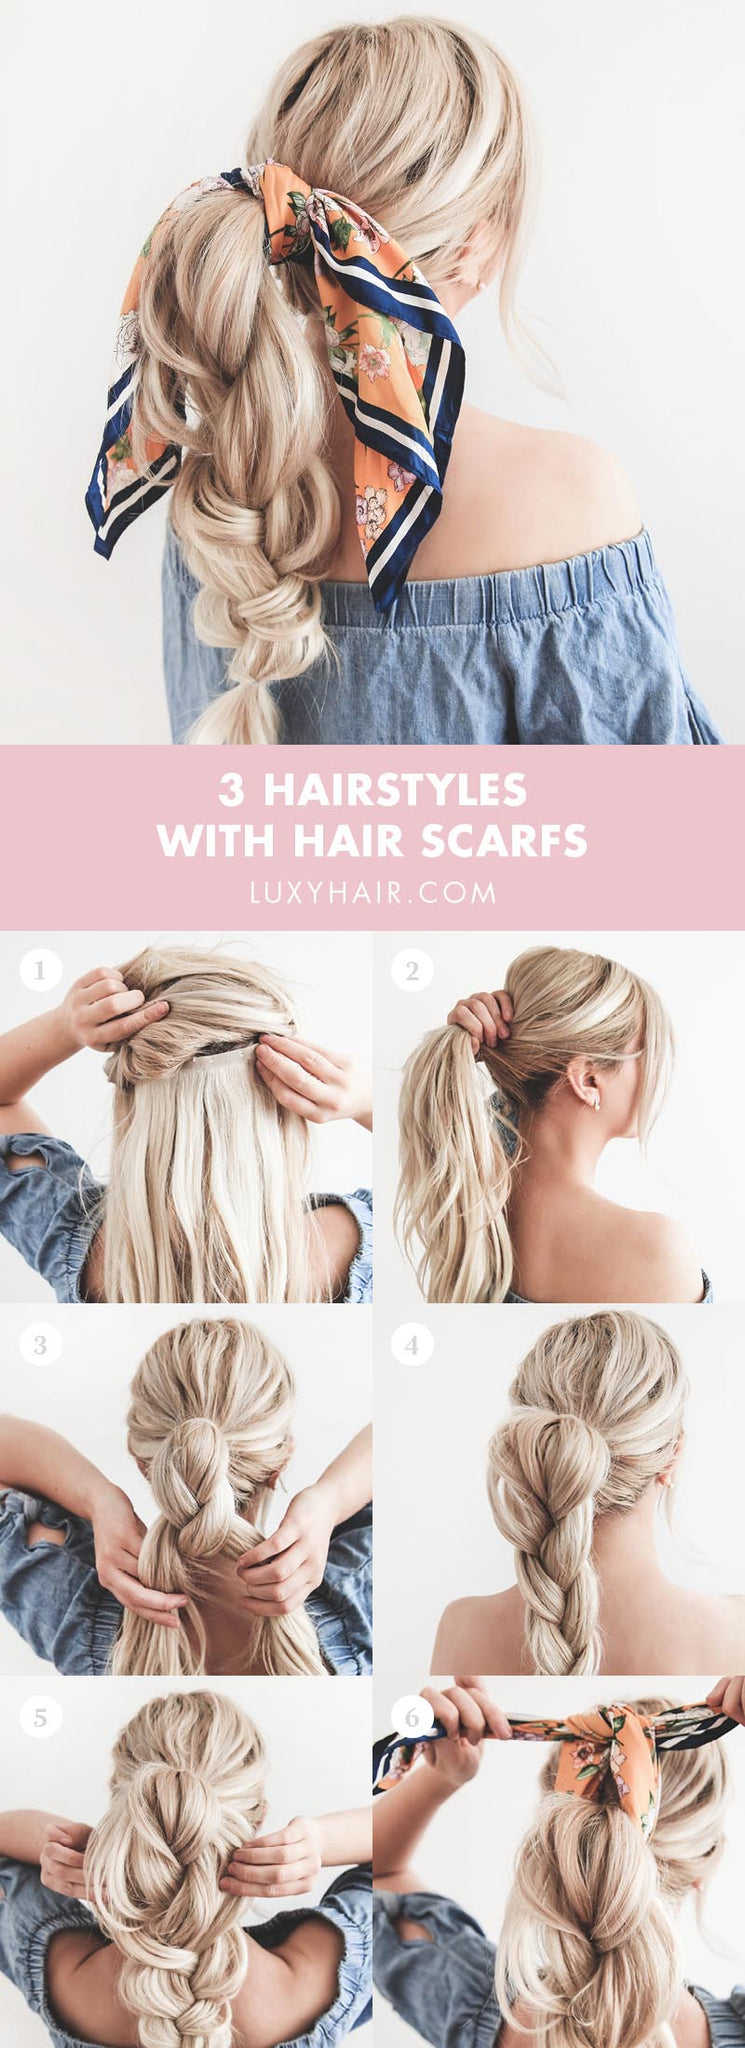 Hairstyles with headscarves